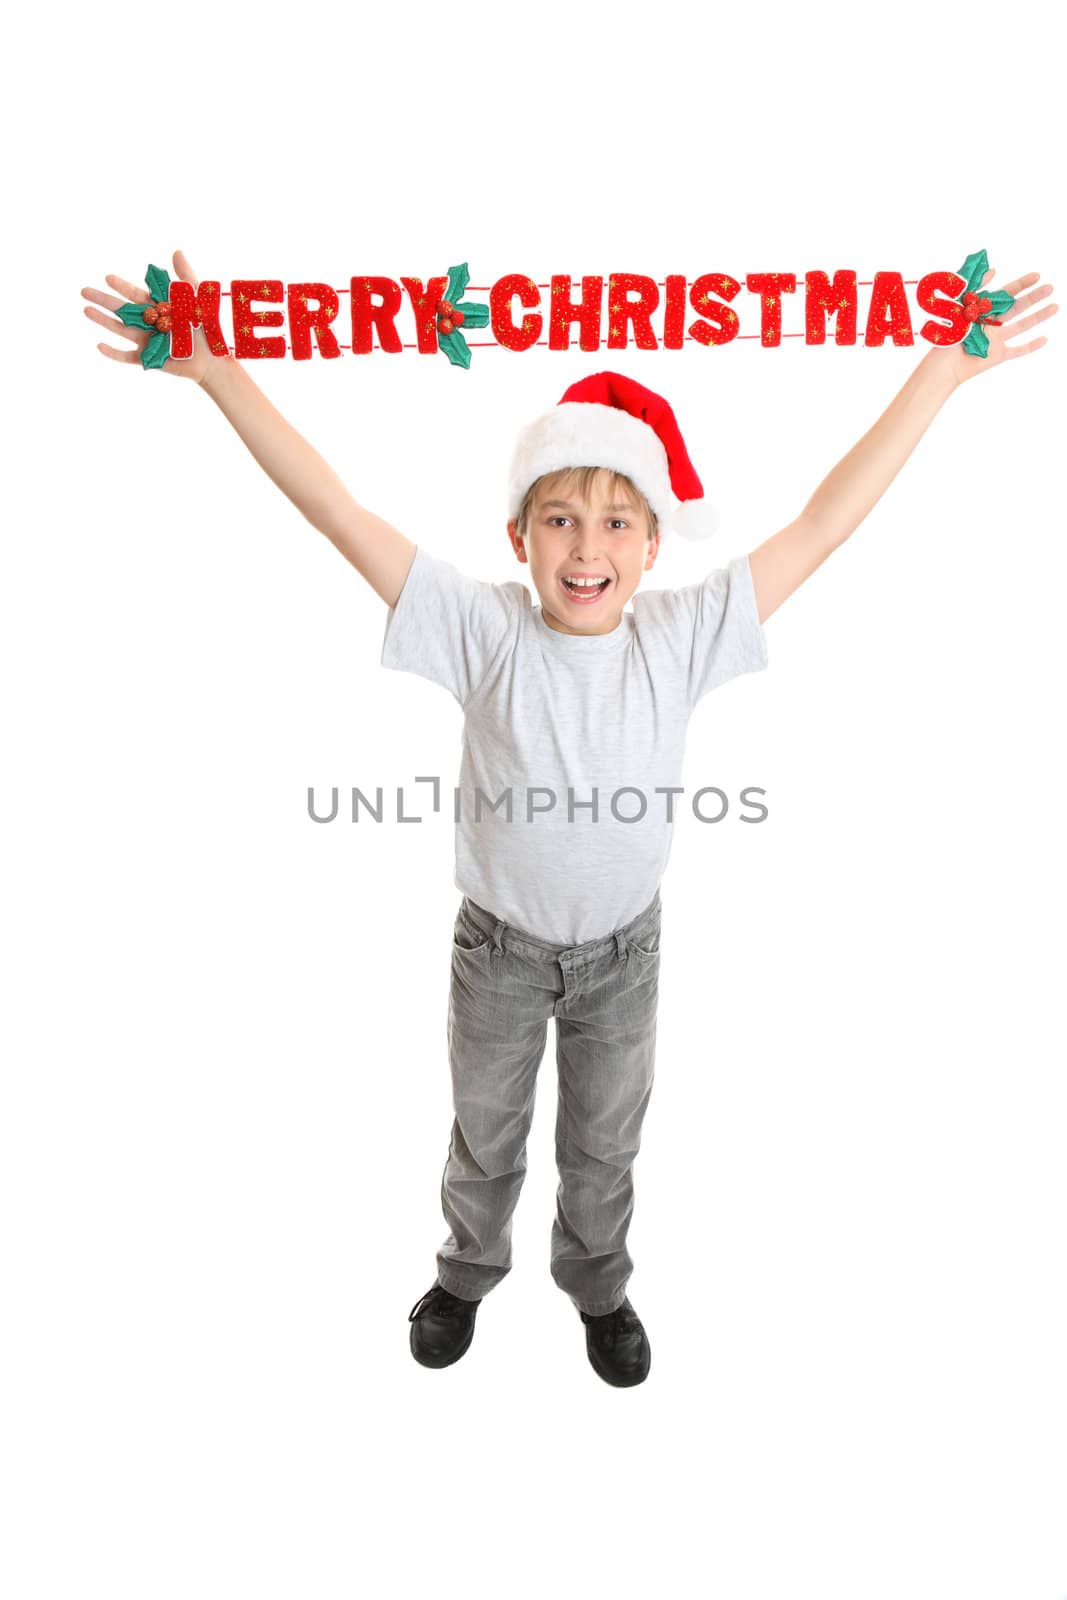 Christmas child with Joyful message by lovleah